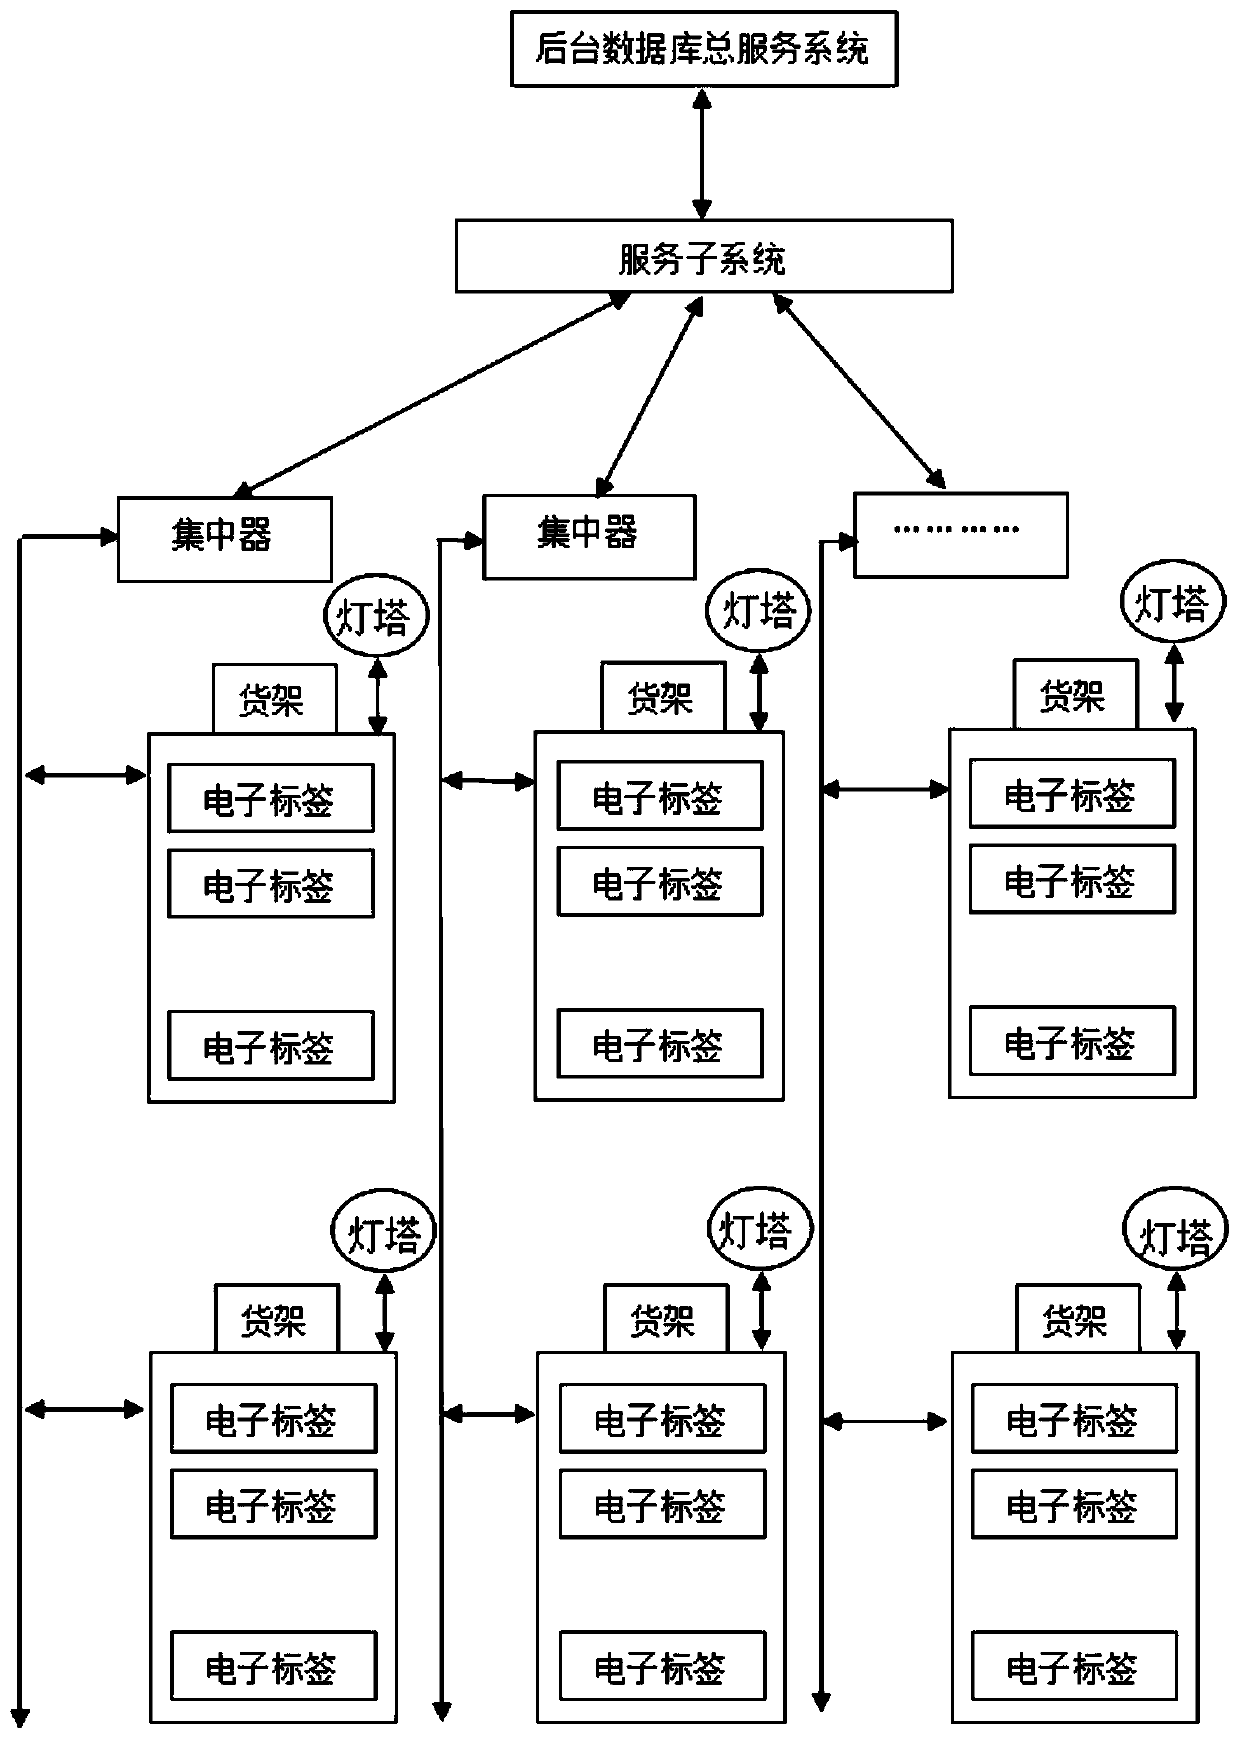 Warehousing and sorting system and method based on Internet of Things monitoring